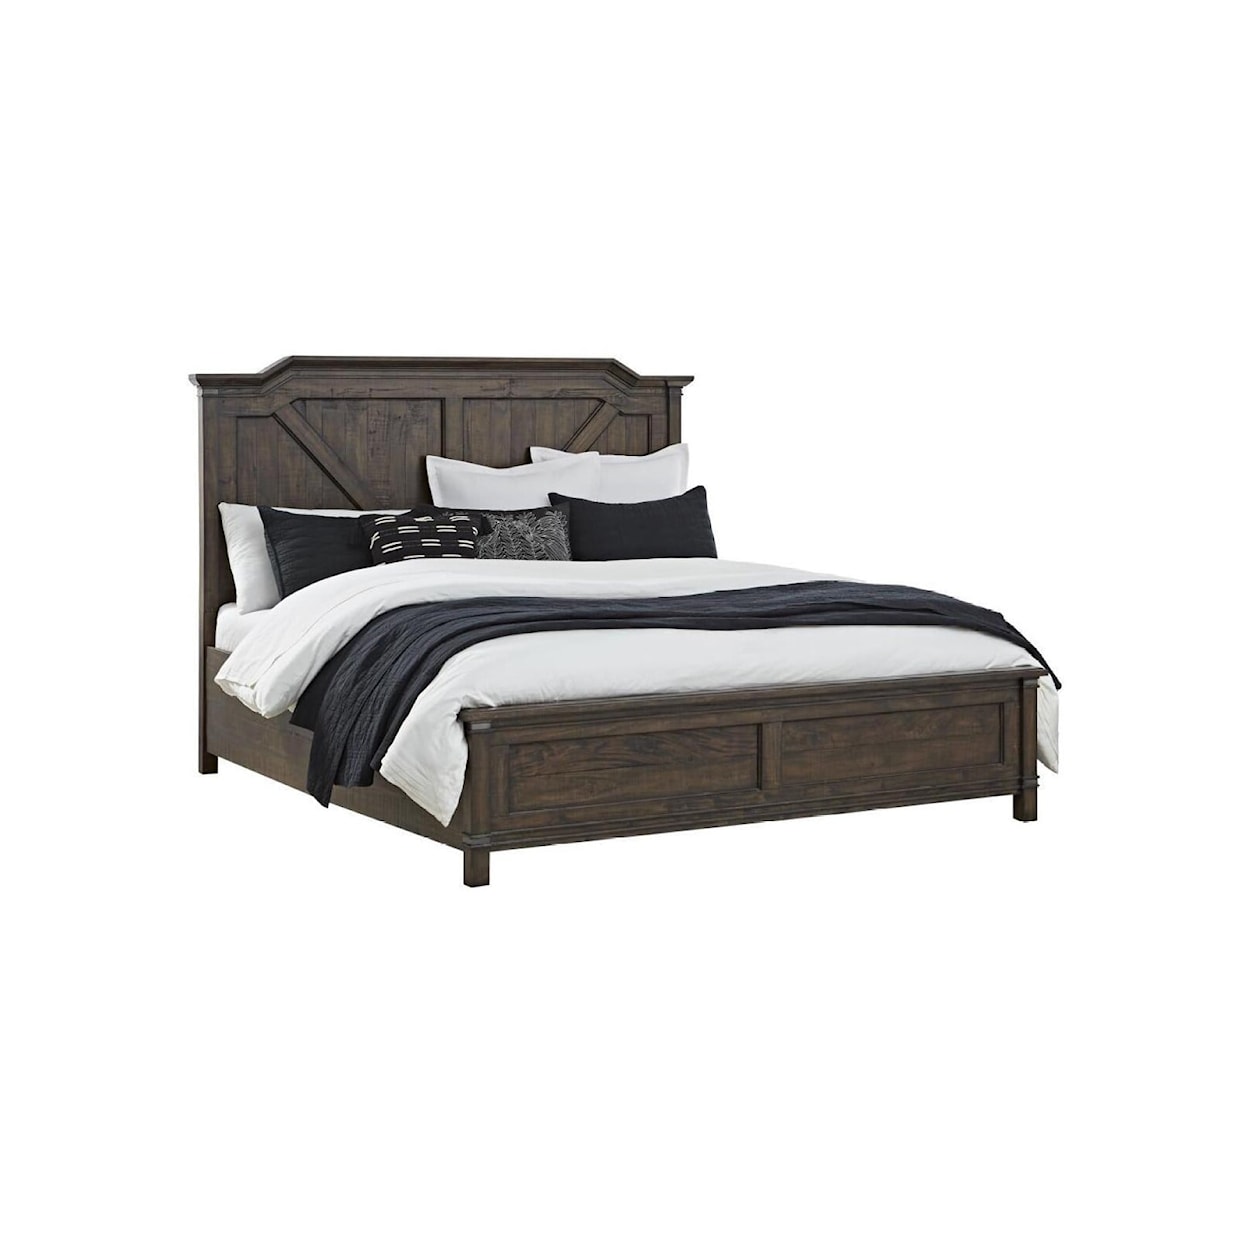 American Woodcrafters Farmwood King Panel Bed